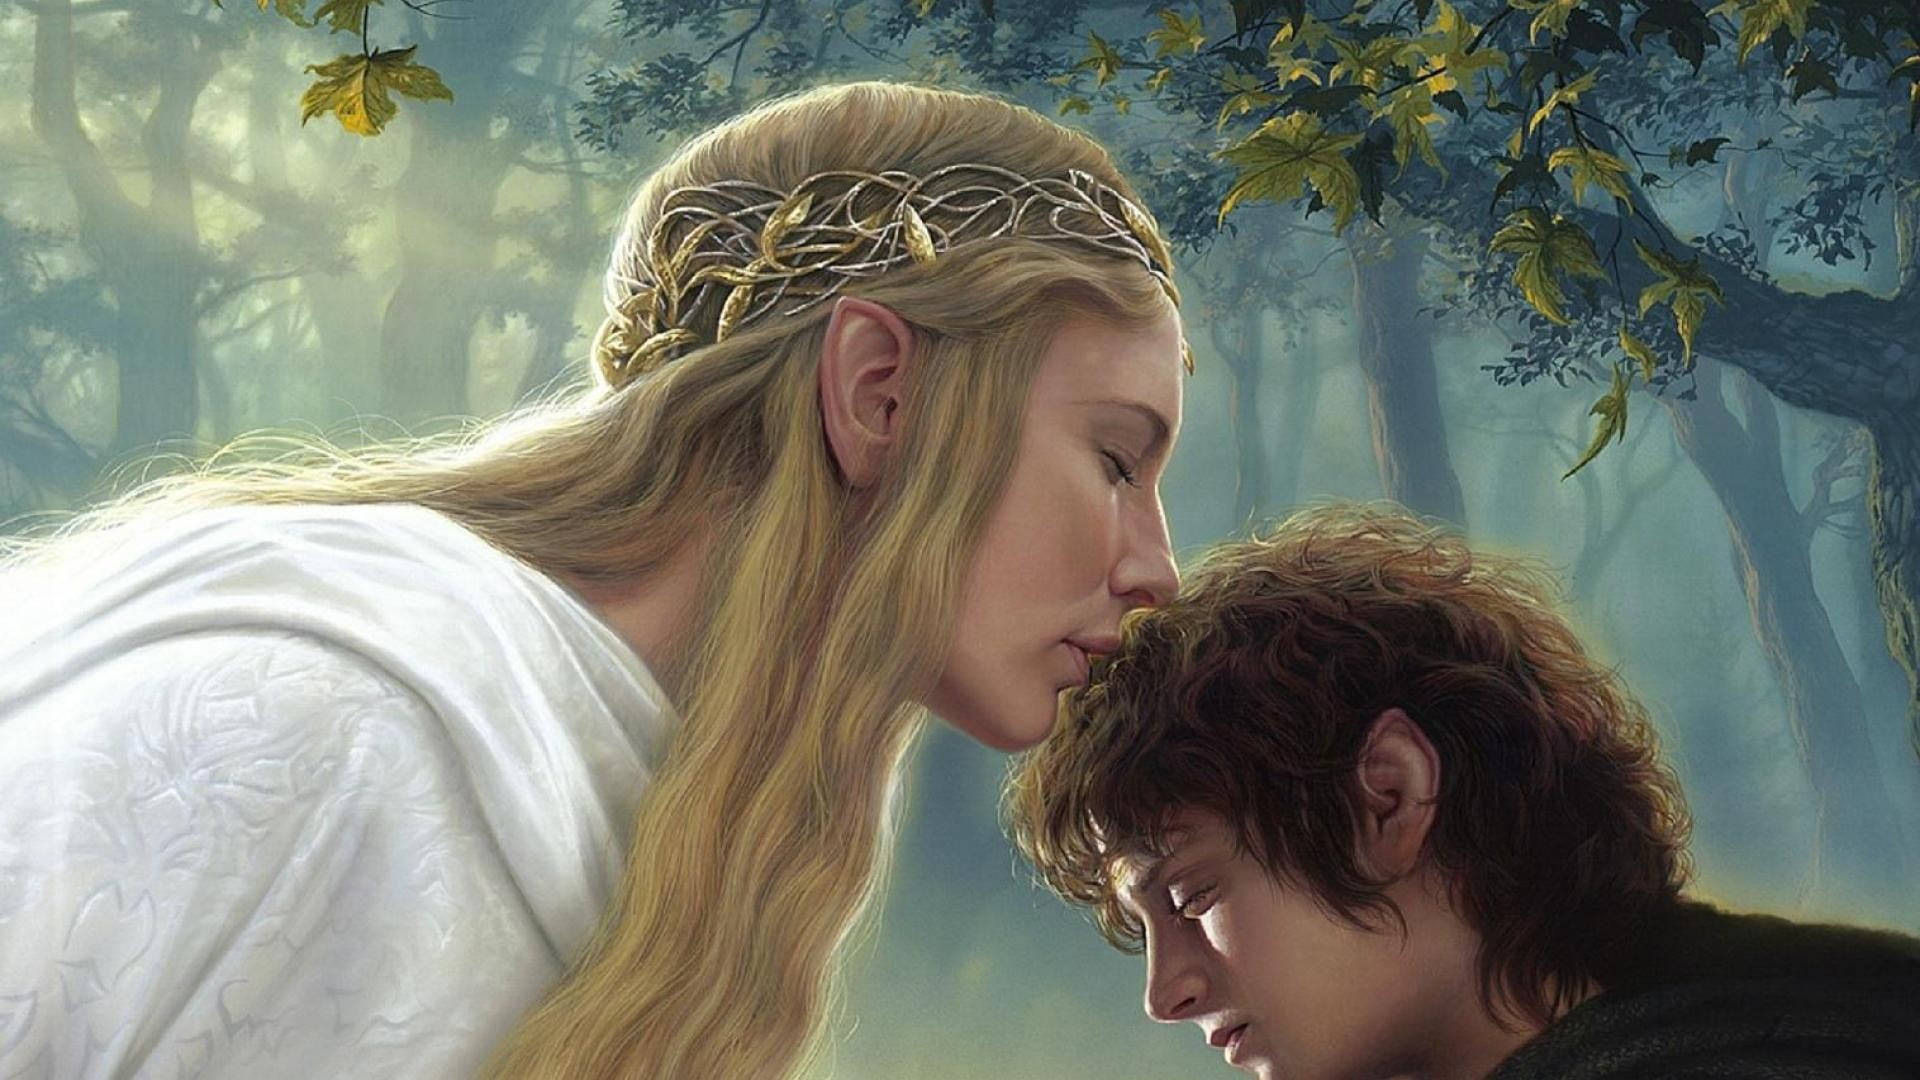 Cate Blanchett As Galadriel With Frodo